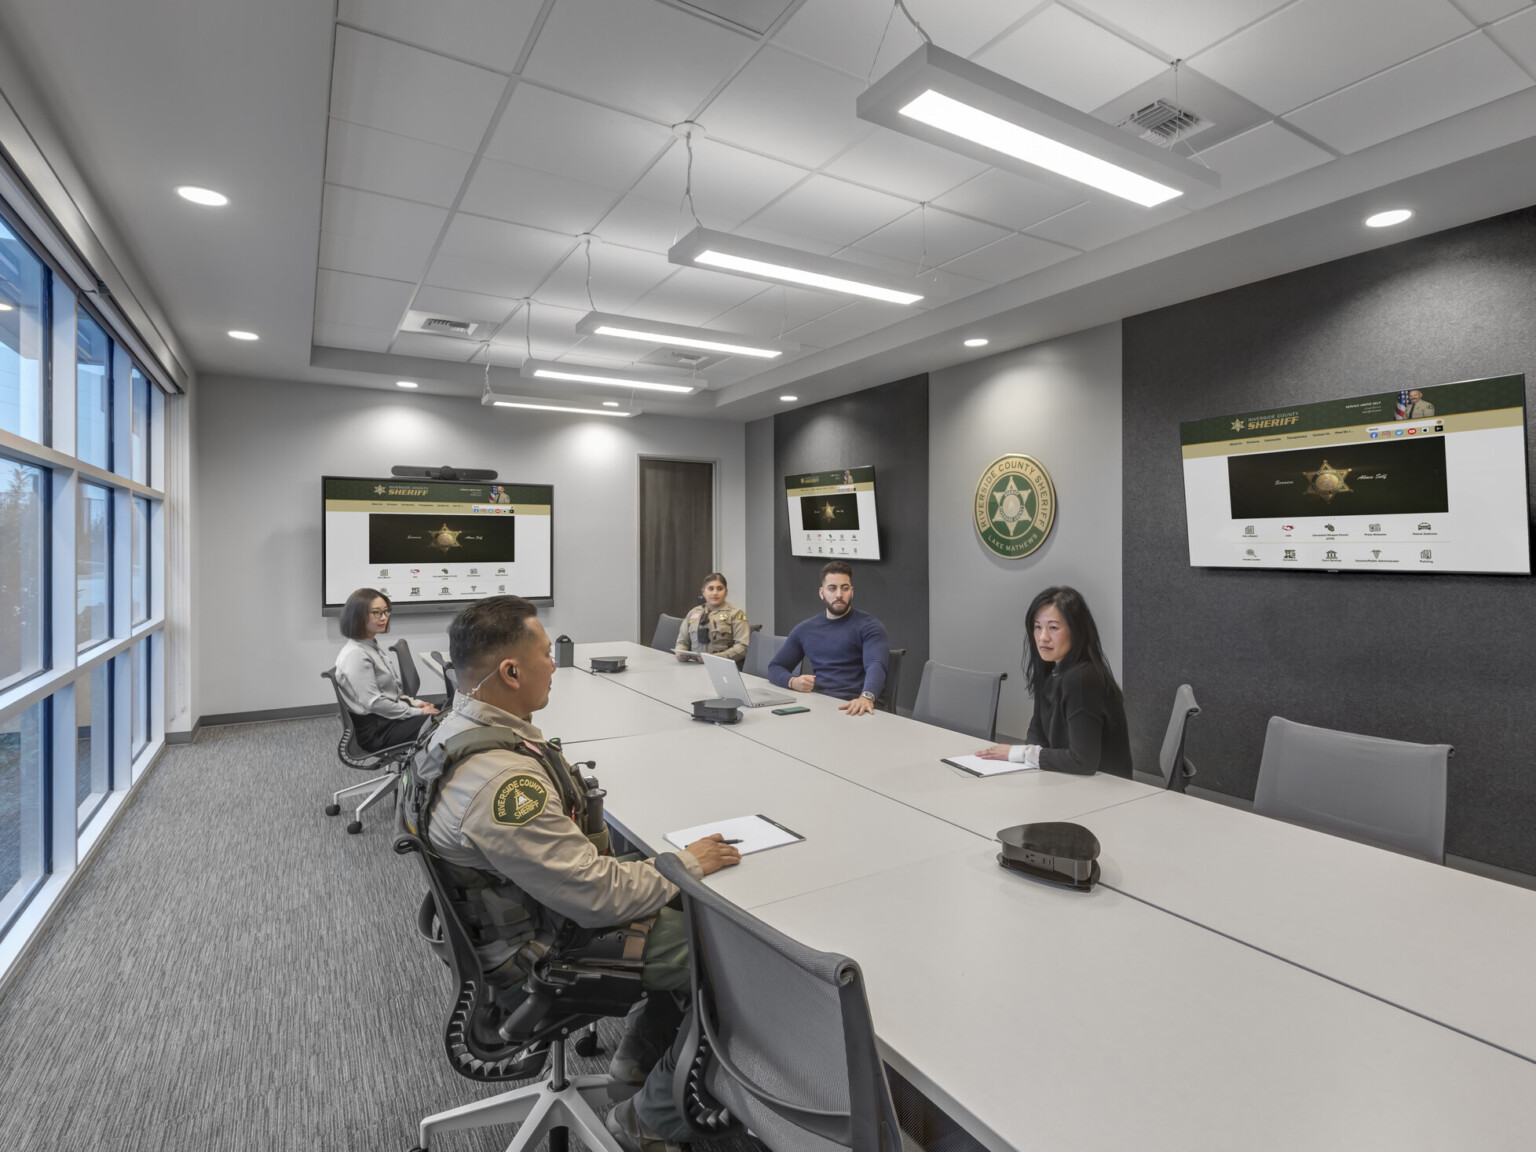 several officers and employees seated in conference room with video and remote meeting capabilities, soundproofing, floor-to-ceiling windows, natural light fixtures